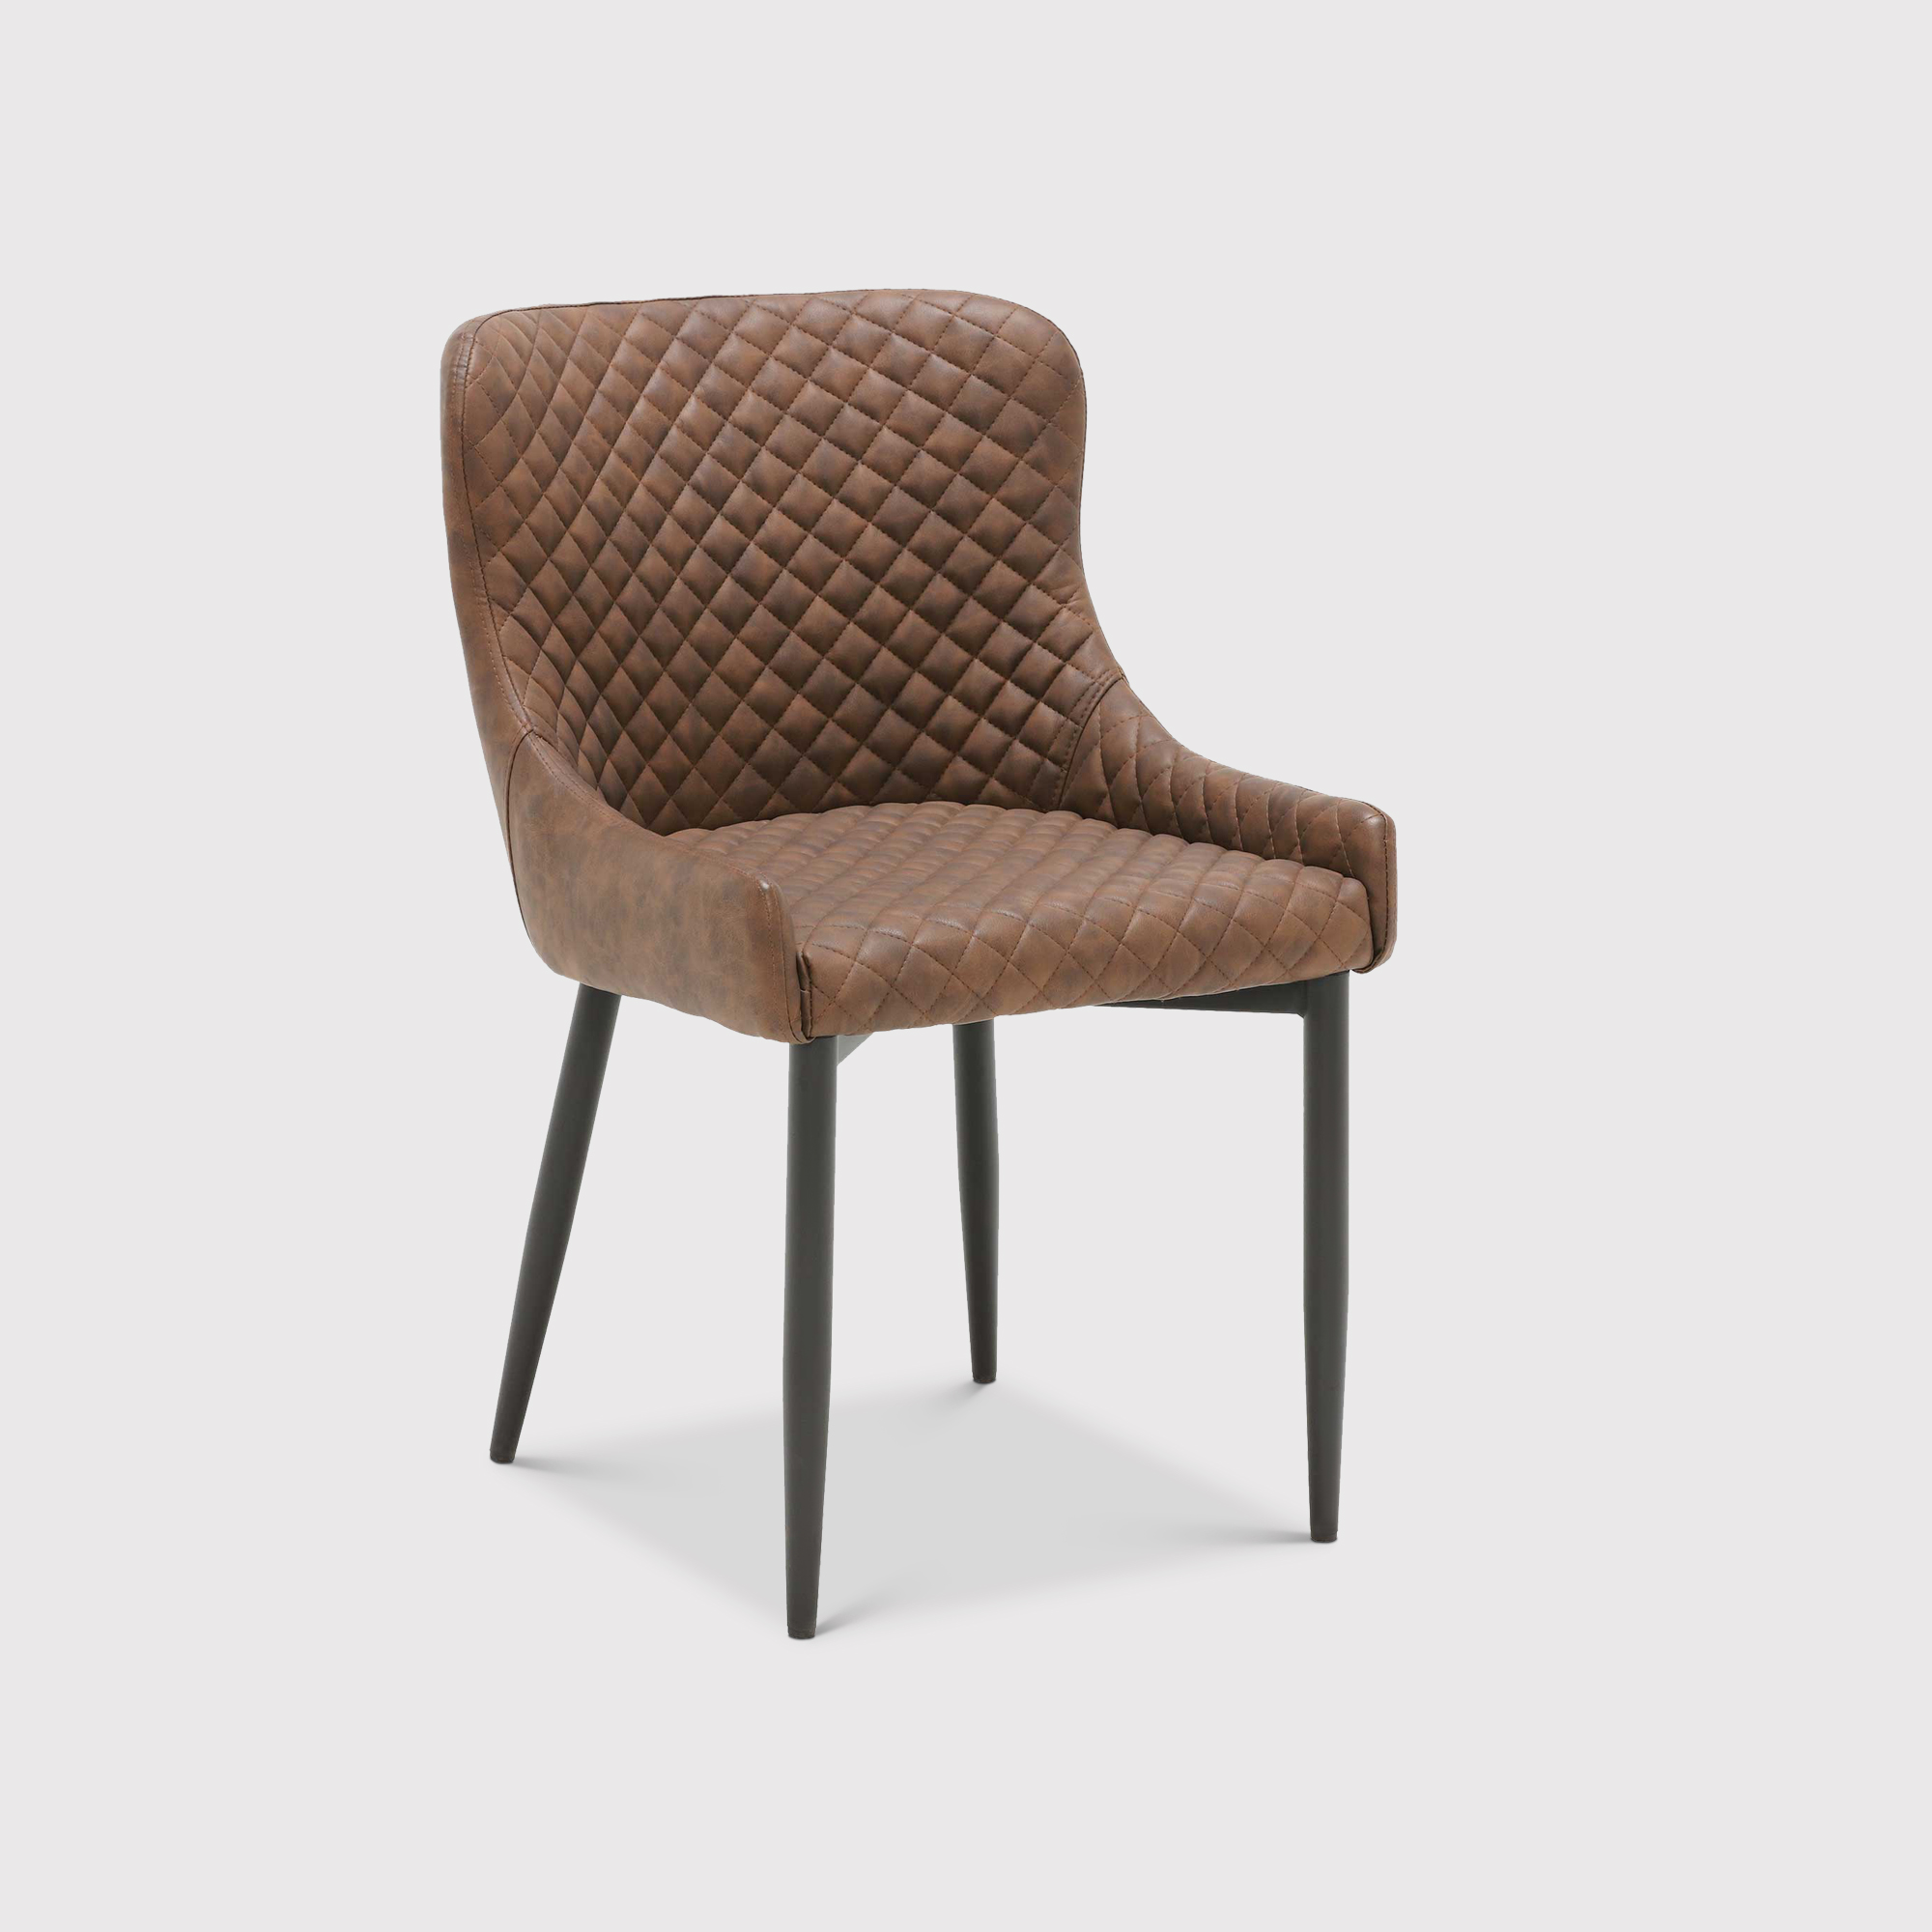 Rivington Dining Chair, Brown | Barker & Stonehouse